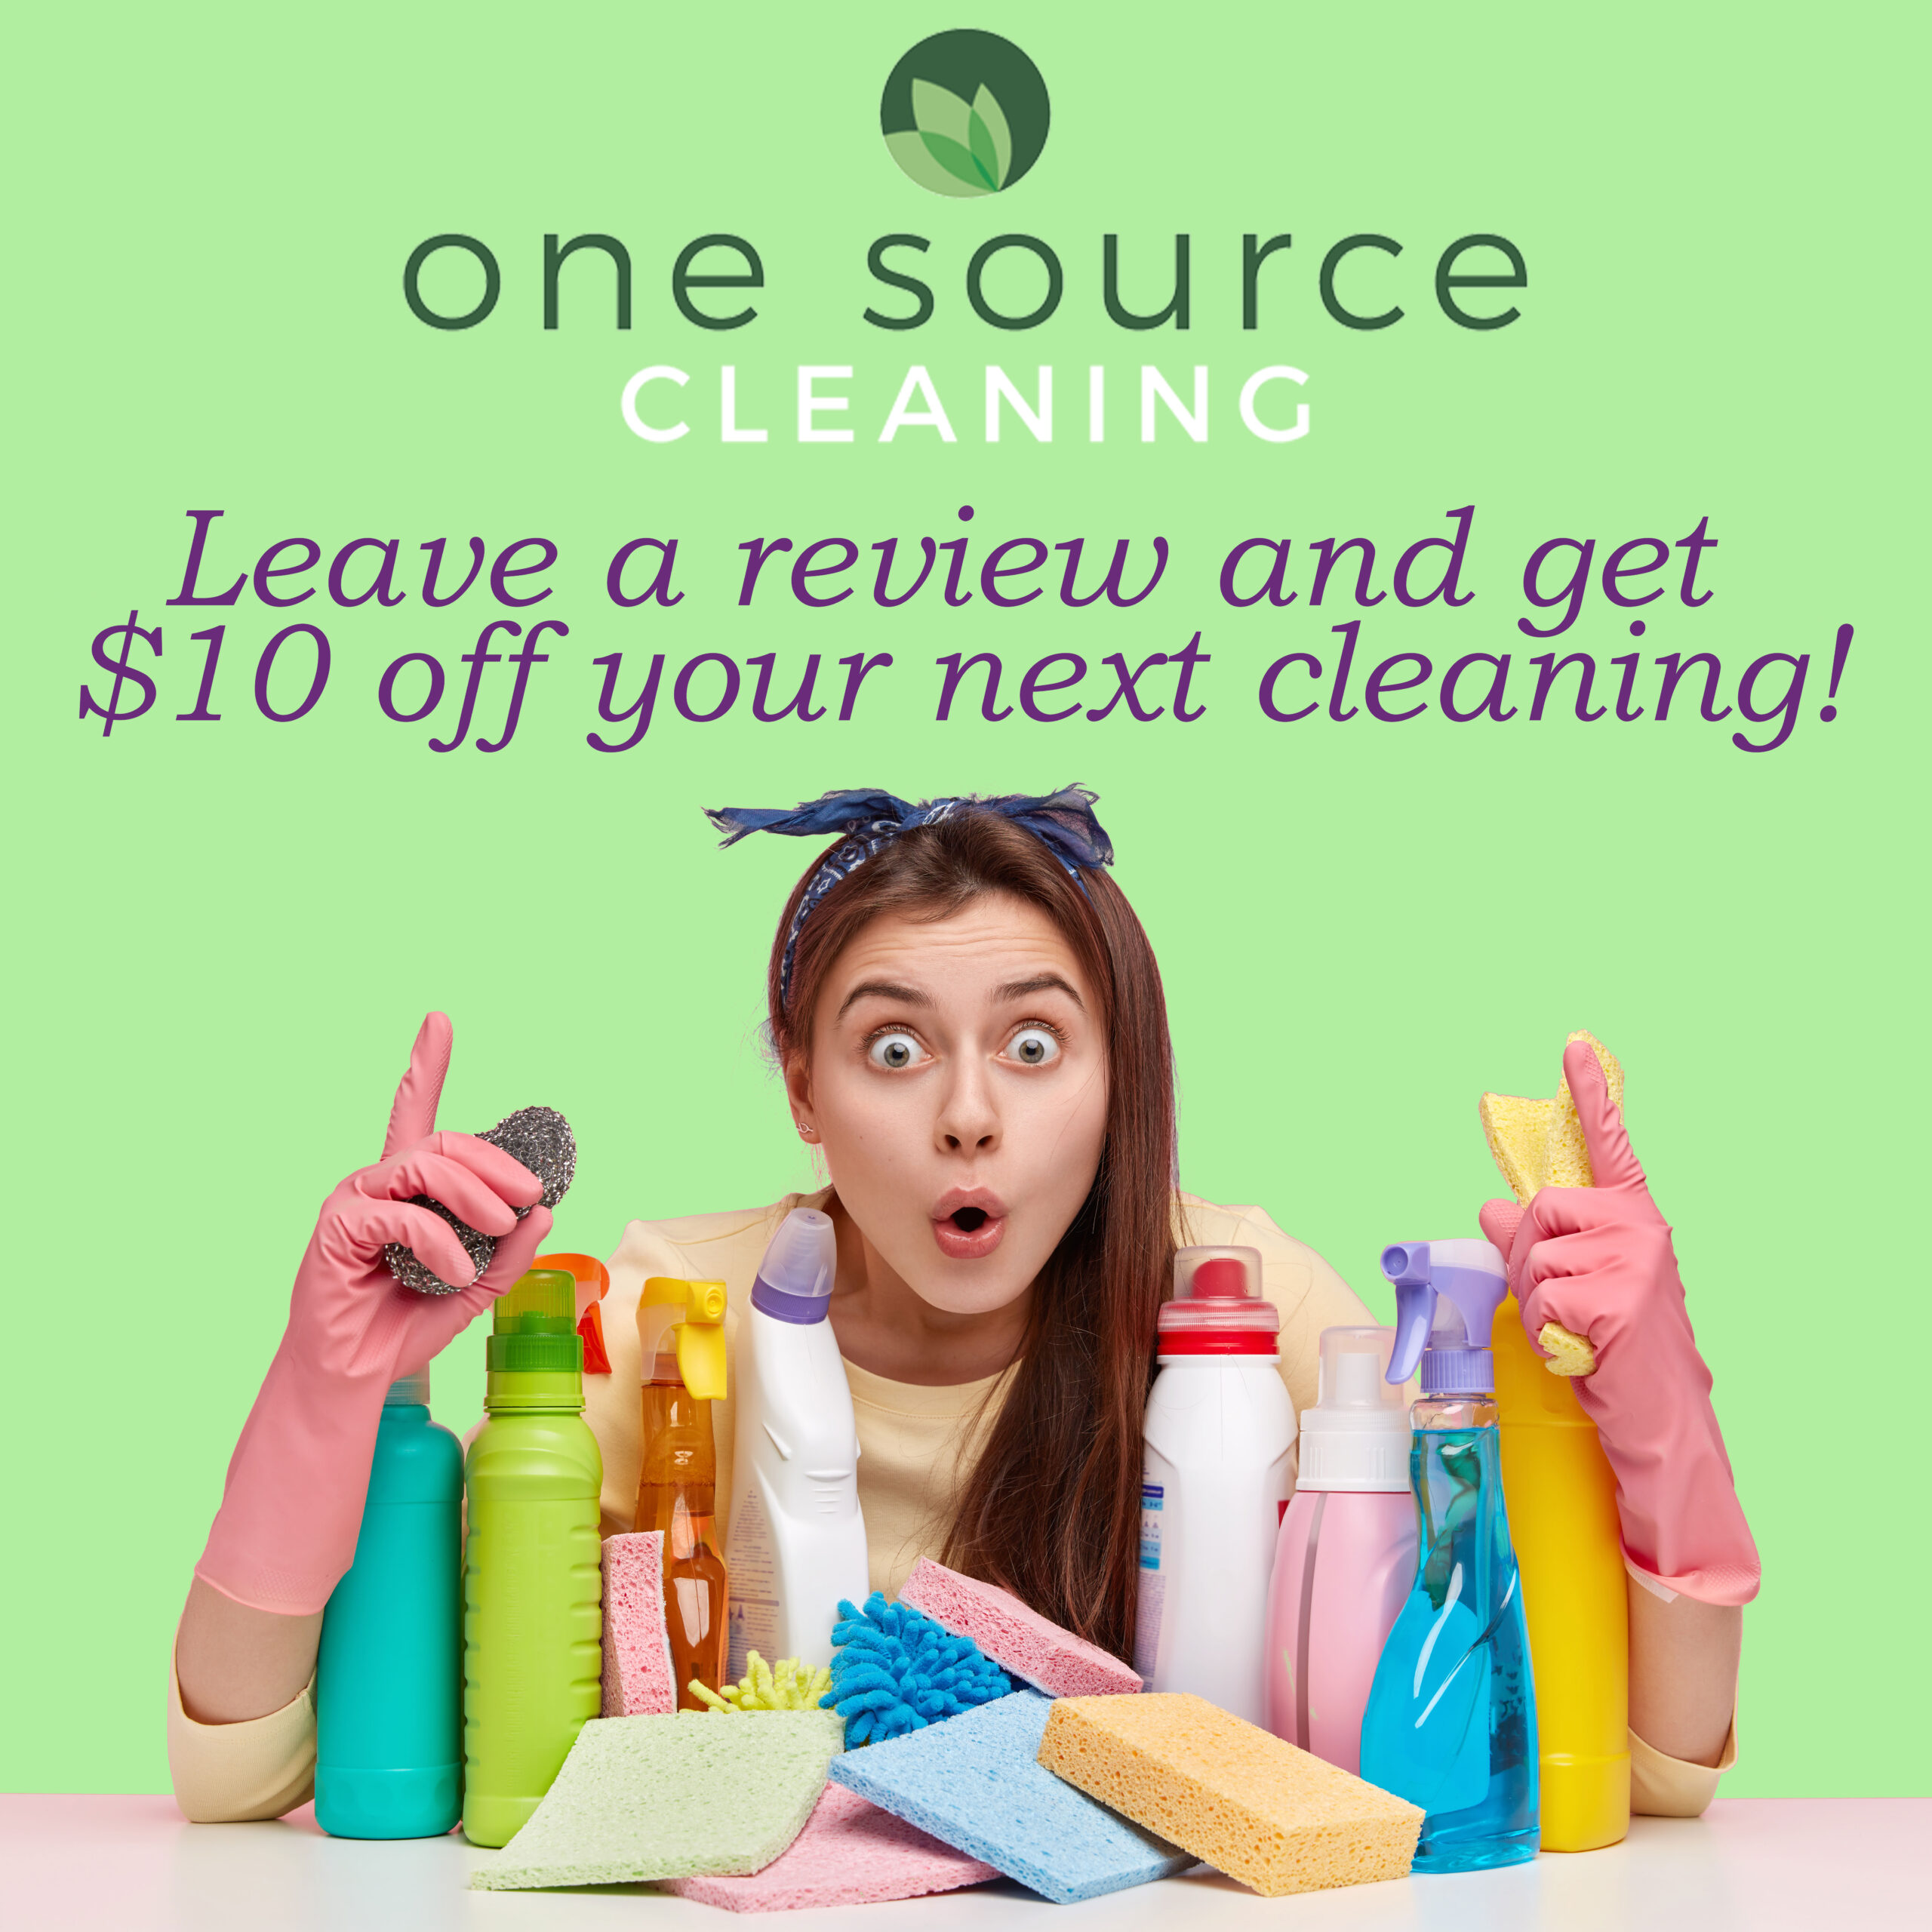 one source cleaning $10 discount for your review